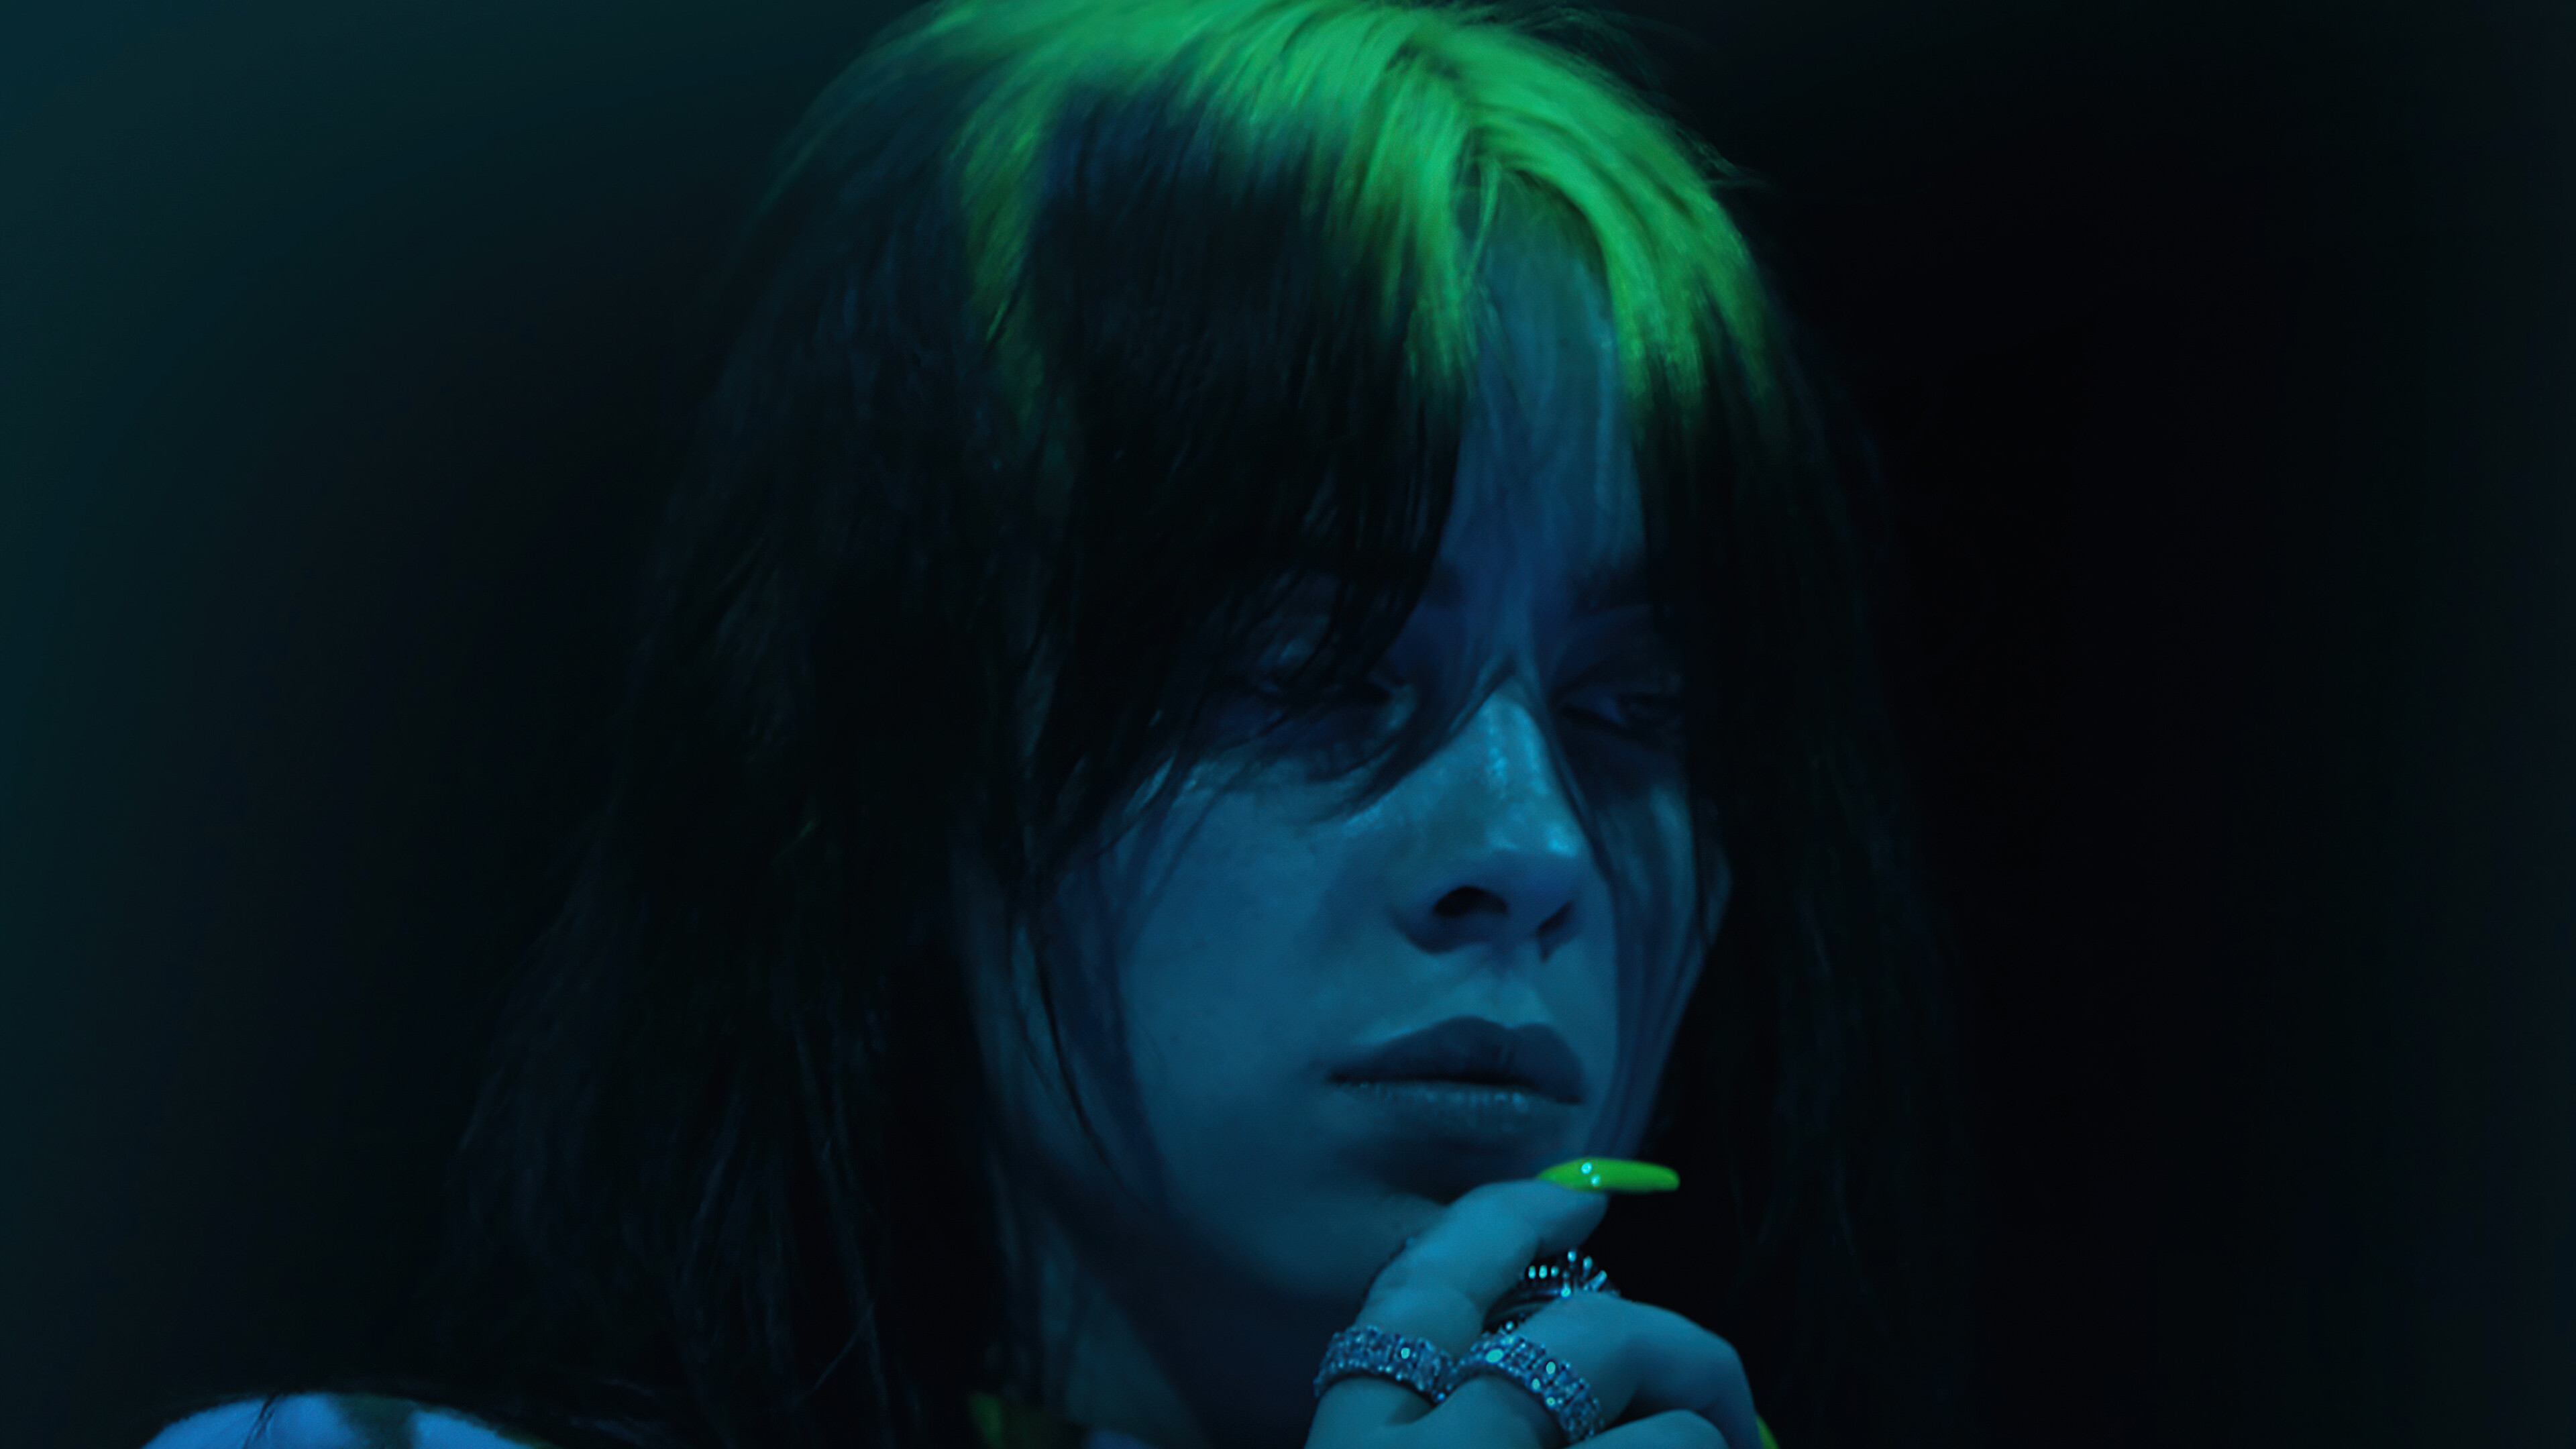 Billie Eilish: The Worlds A Little Blurry, An intimate look at the singer-songwriter's journey, Documentary, 2021. 3840x2160 4K Background.